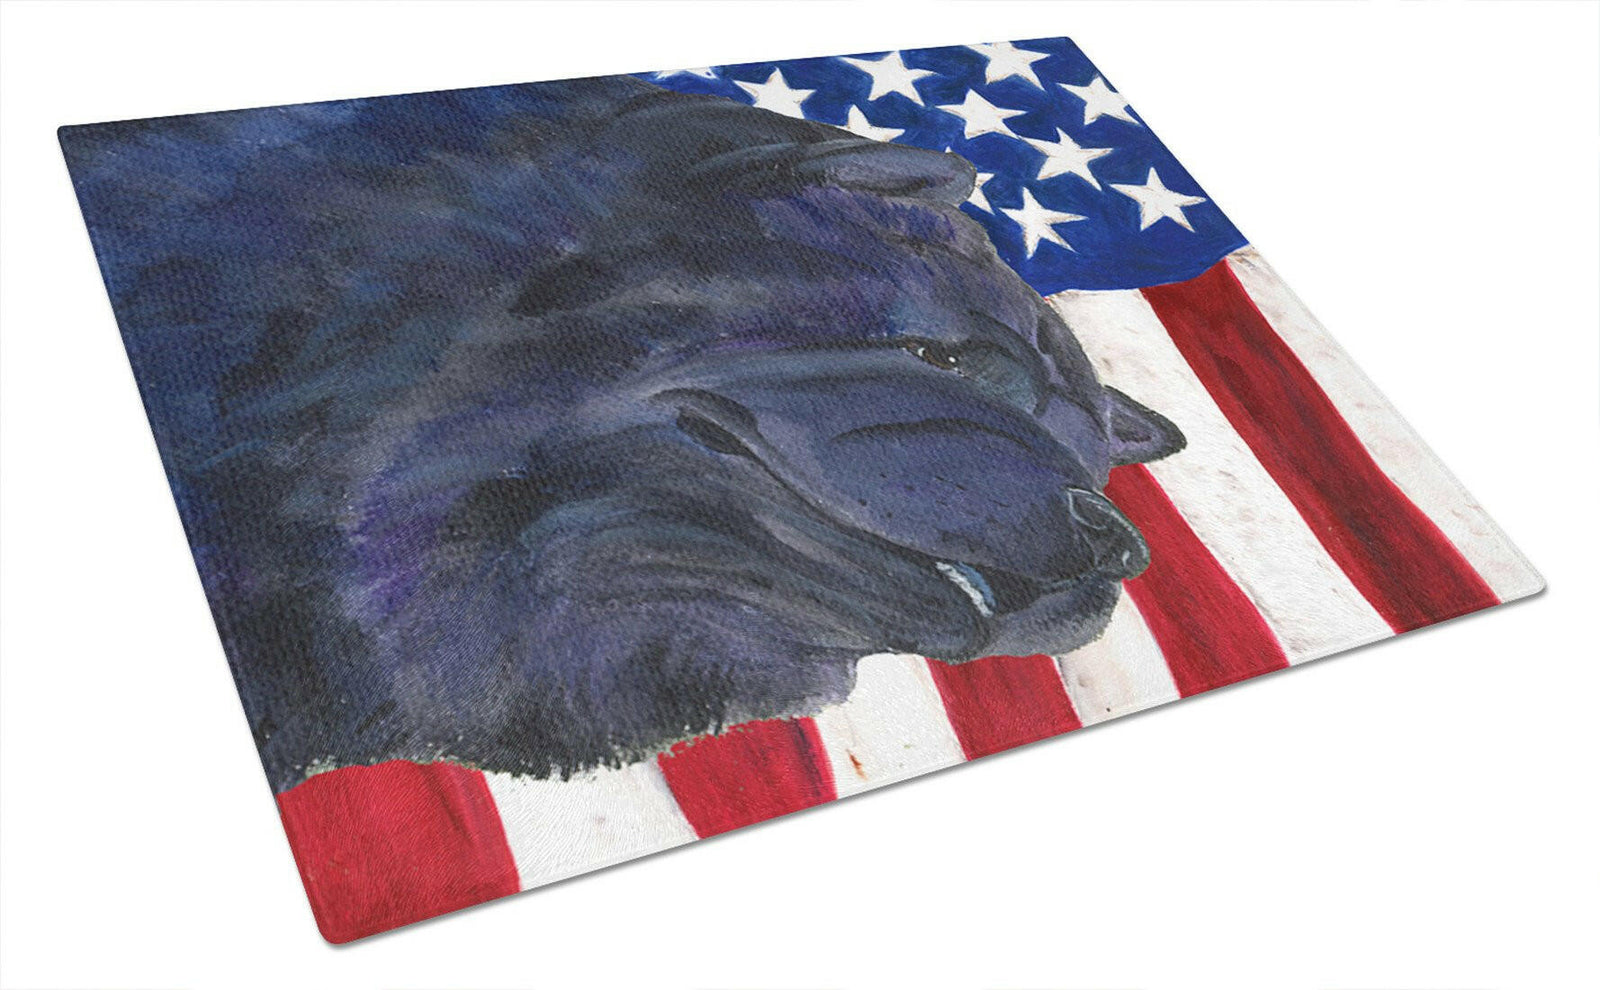 USA American Flag with Chow Chow Glass Cutting Board Large by Caroline's Treasures